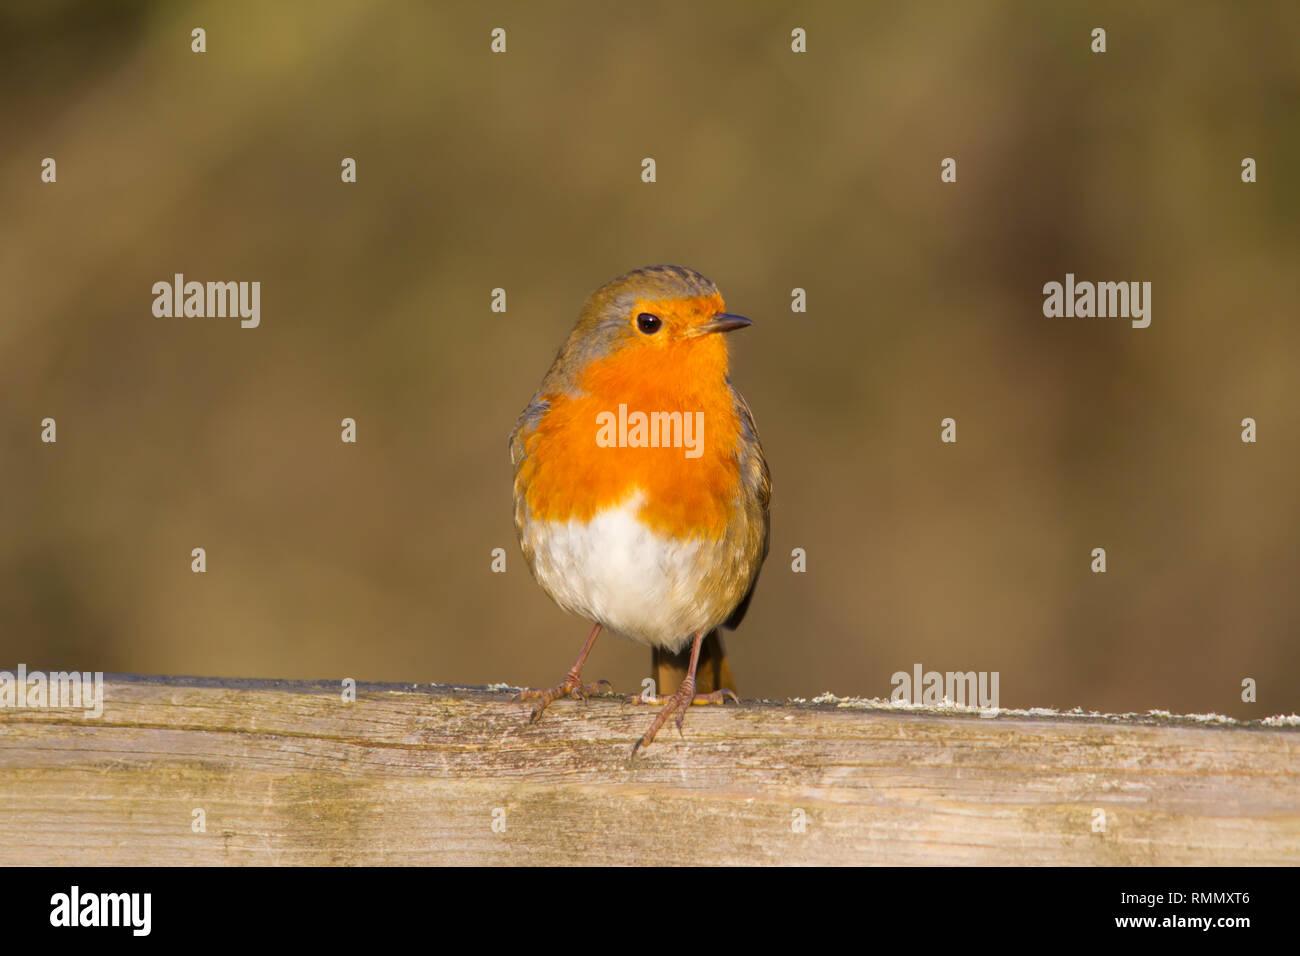 European Robin (Erithacus rubecula) perched on a wooden gate. Stock Photo